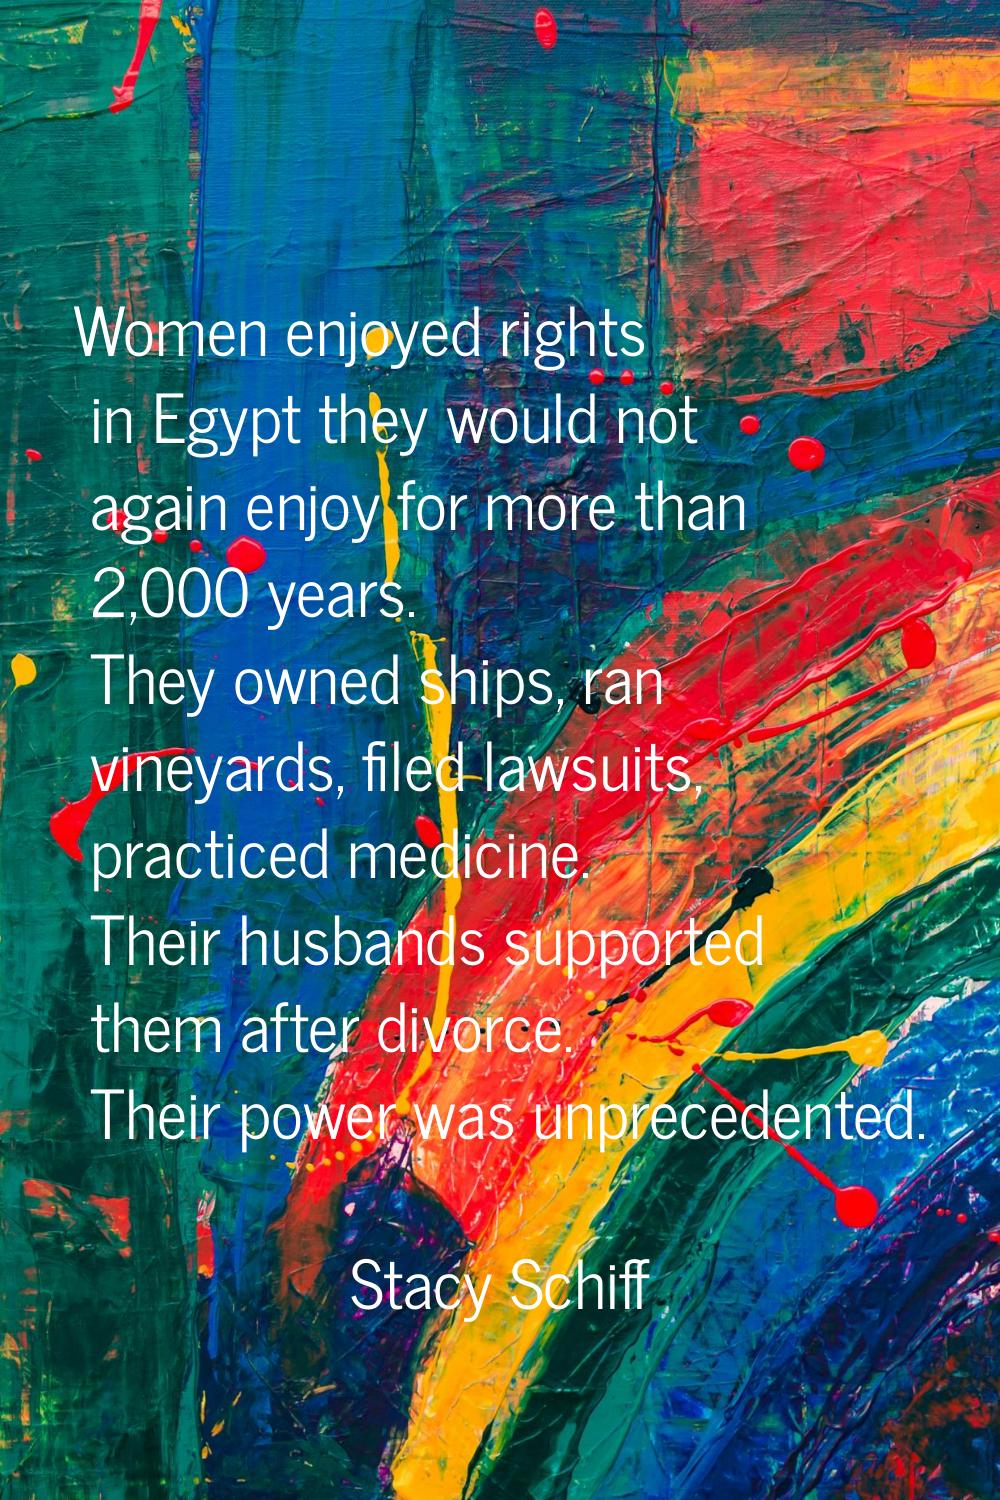 Women enjoyed rights in Egypt they would not again enjoy for more than 2,000 years. They owned ship